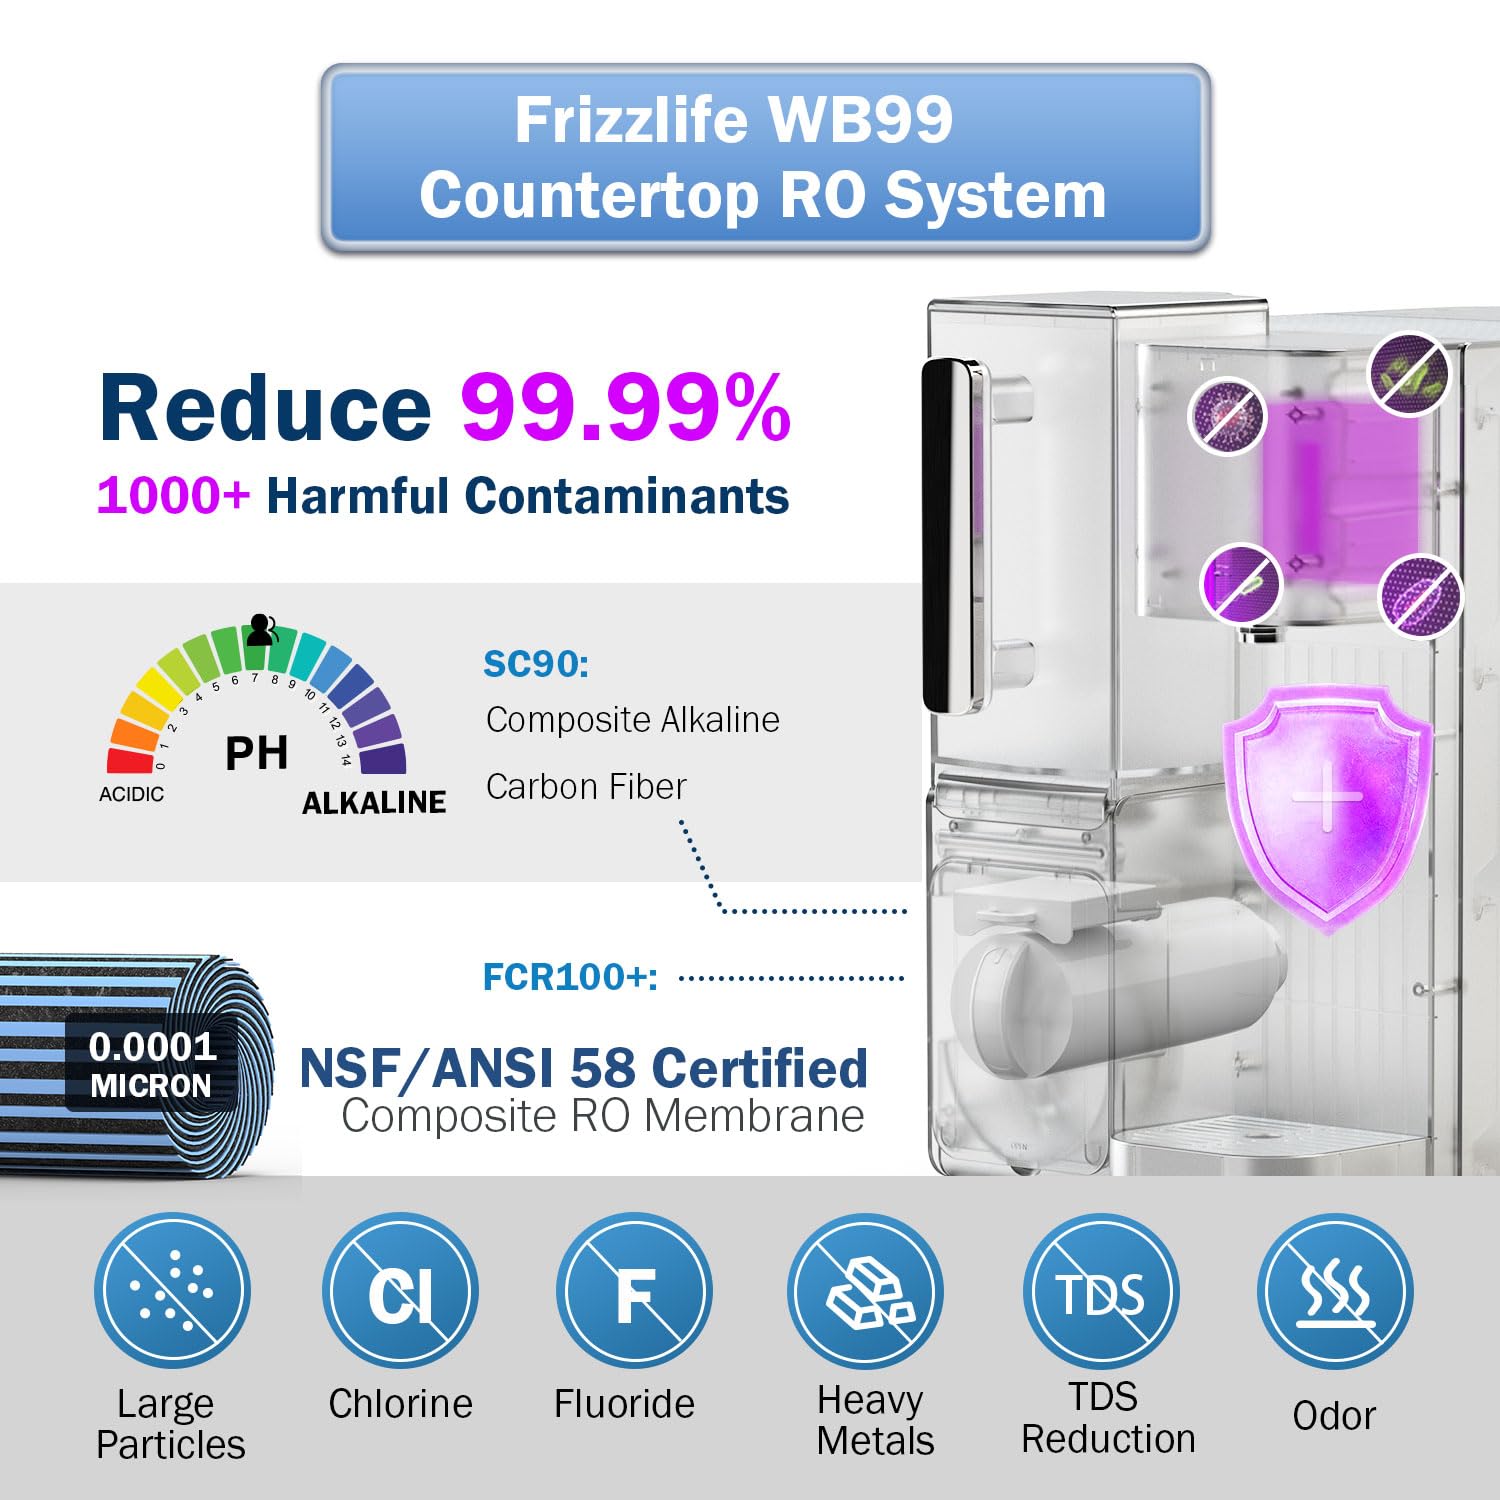 Frizzlife WB99 Countertop Reverse Osmosis System, Alkaline RO Water Filter with Portable Water Pitcher, NSF/ANSI 58 Certified Elements, TDS & Filter Life Monitoring, No Installation, USA Tech Support